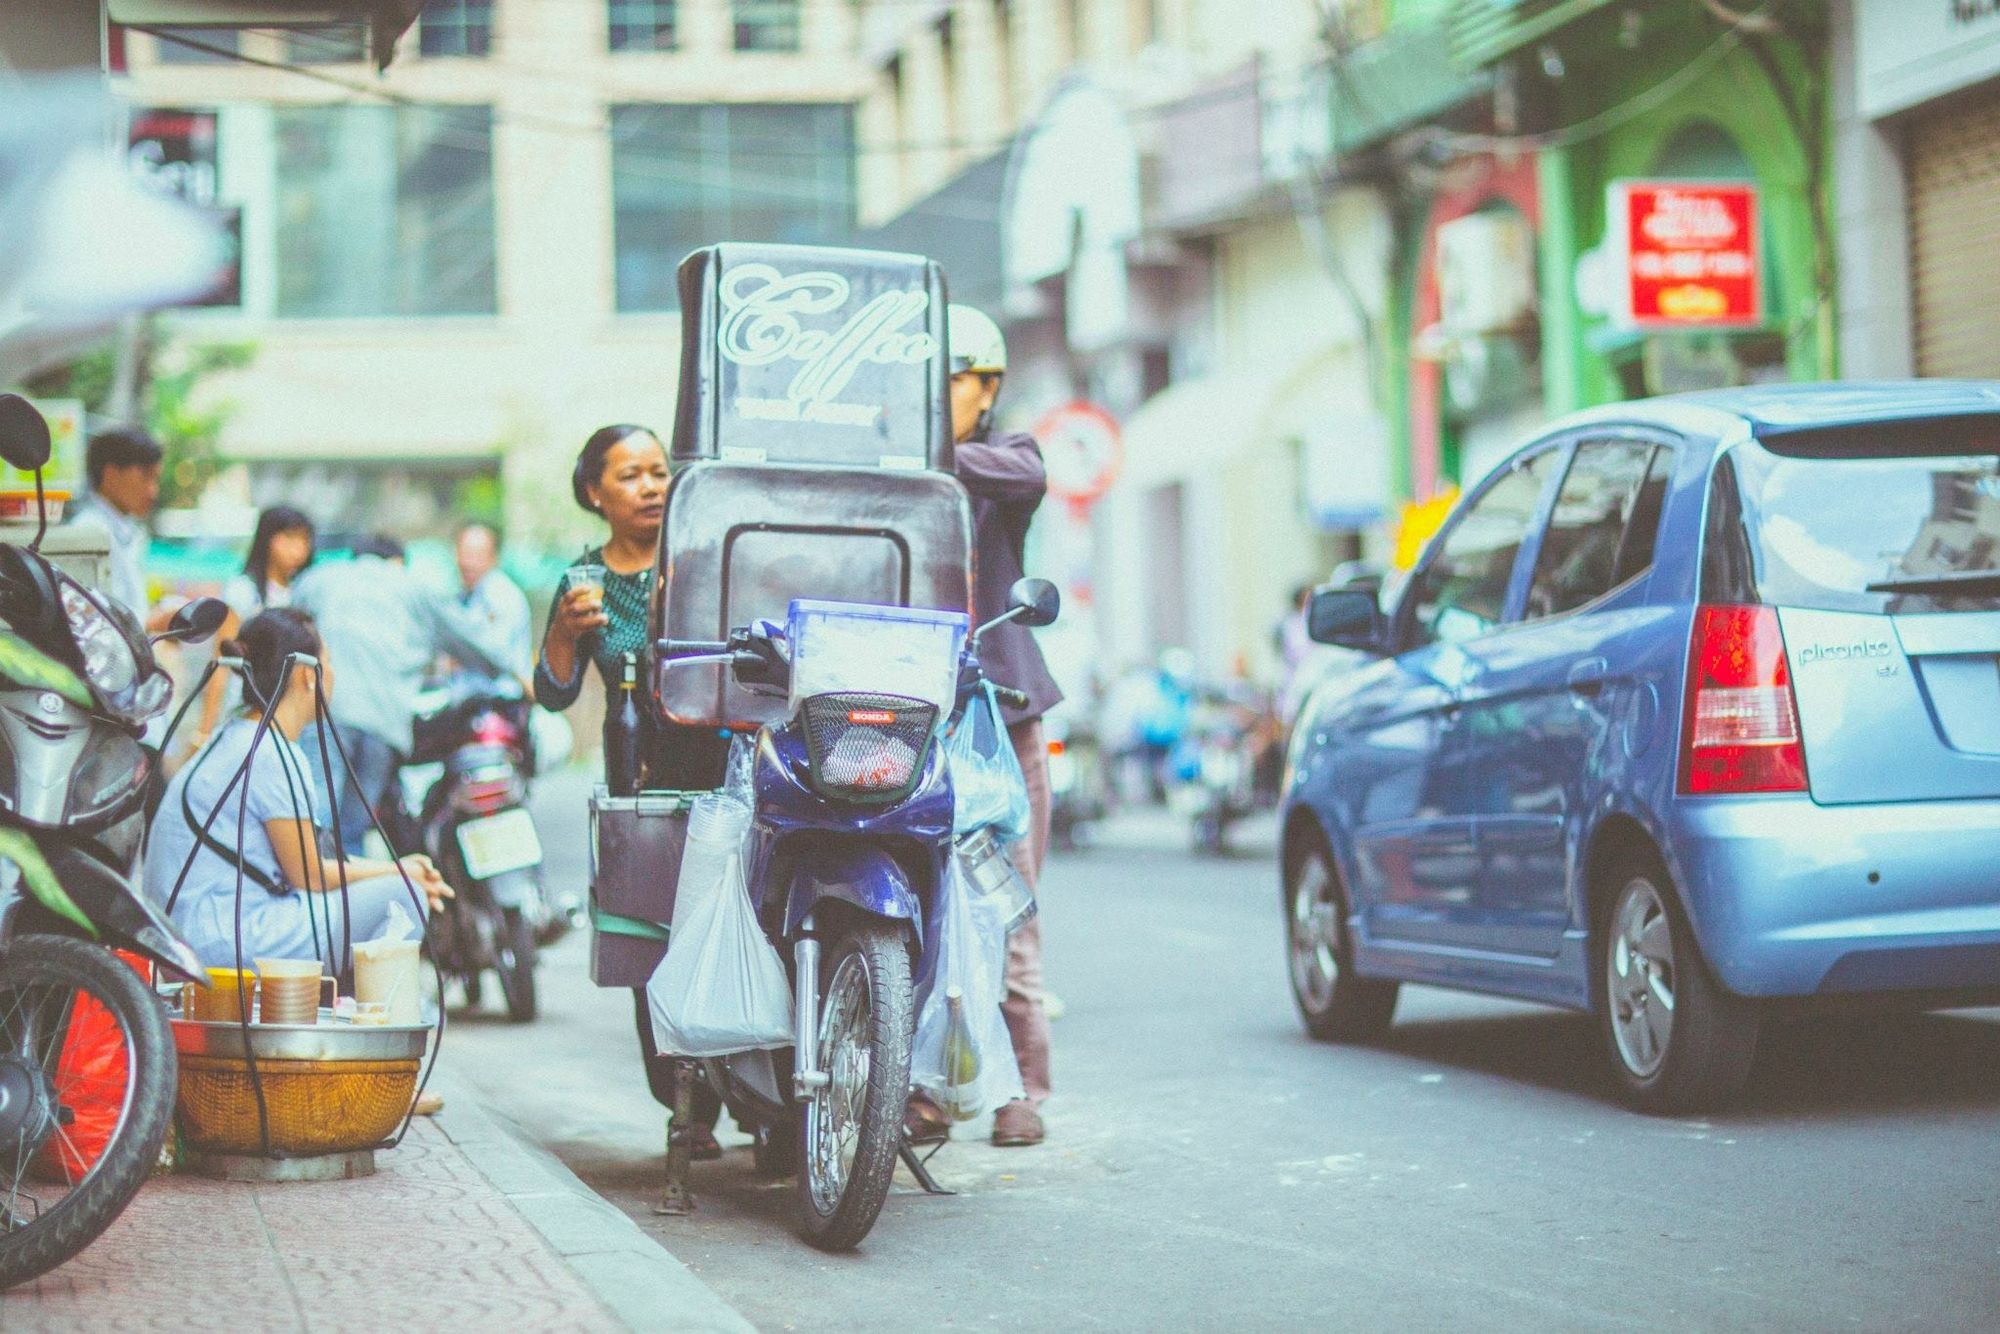 Ho Chi Minh City Walking Tour - You'll find it's more than a modern city